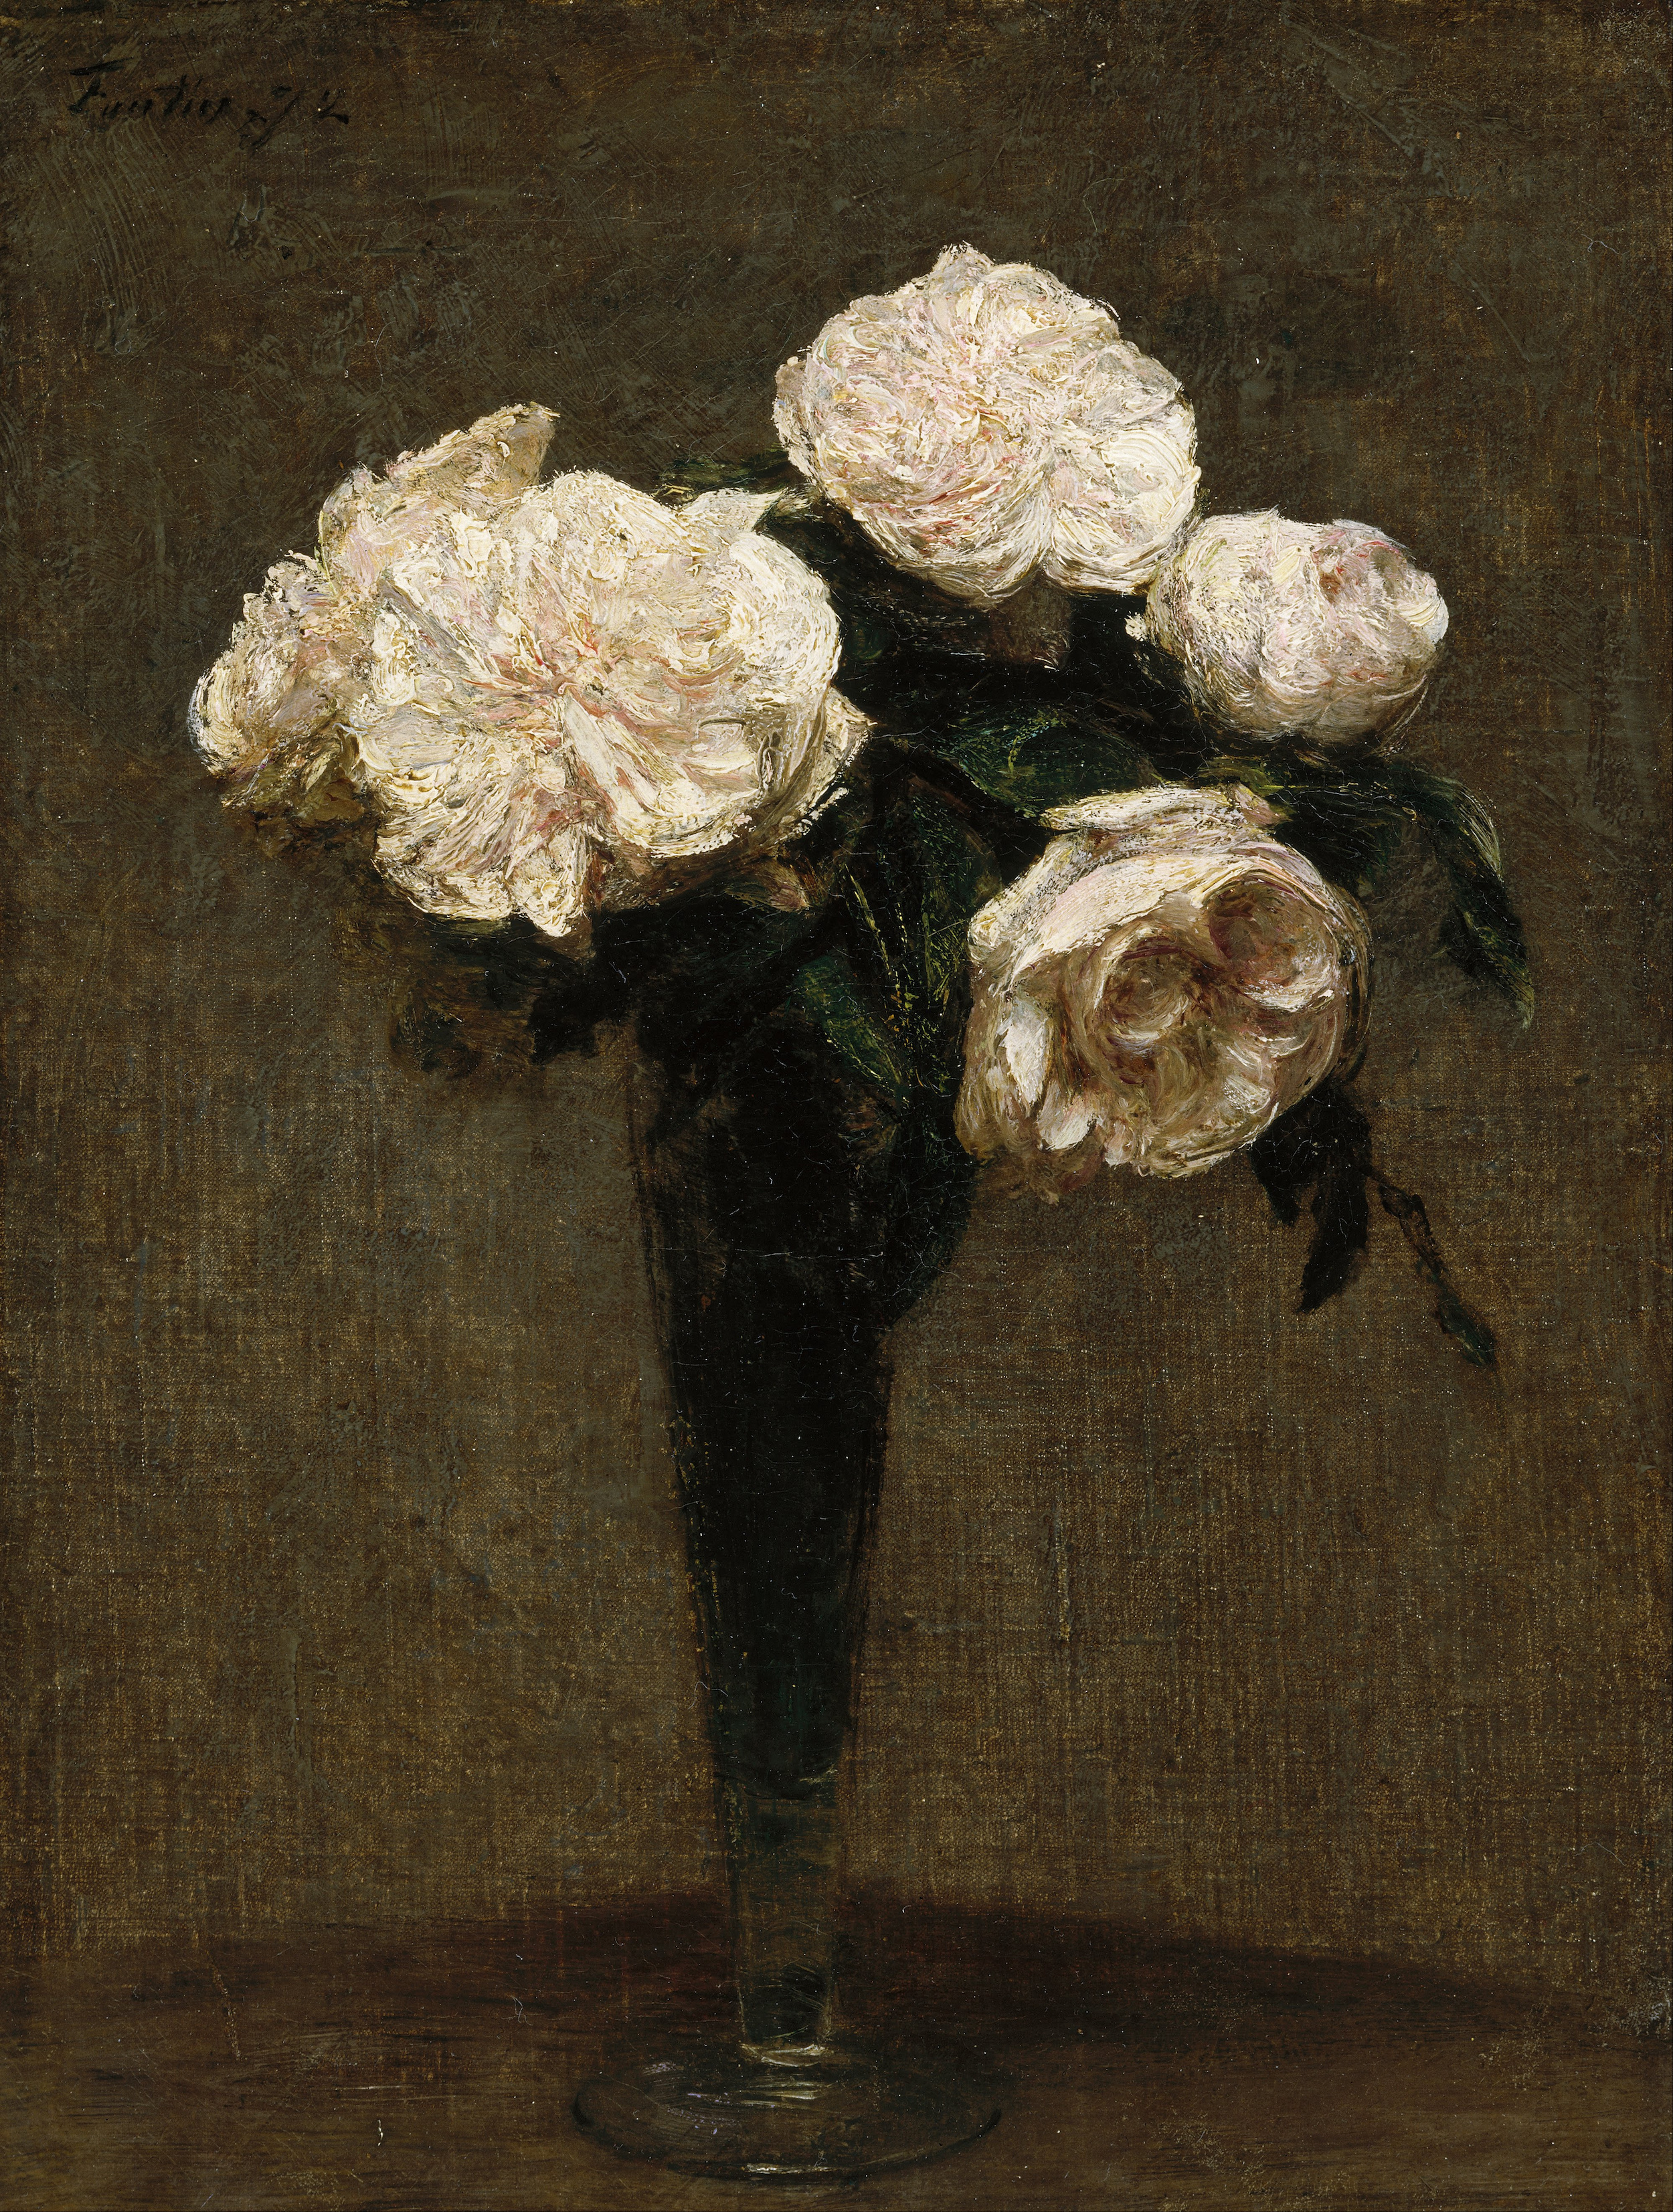 Roses in a Vase by Henri Fantin-Latour - 1872 - 280 x h356 mm Museum of Fine Arts